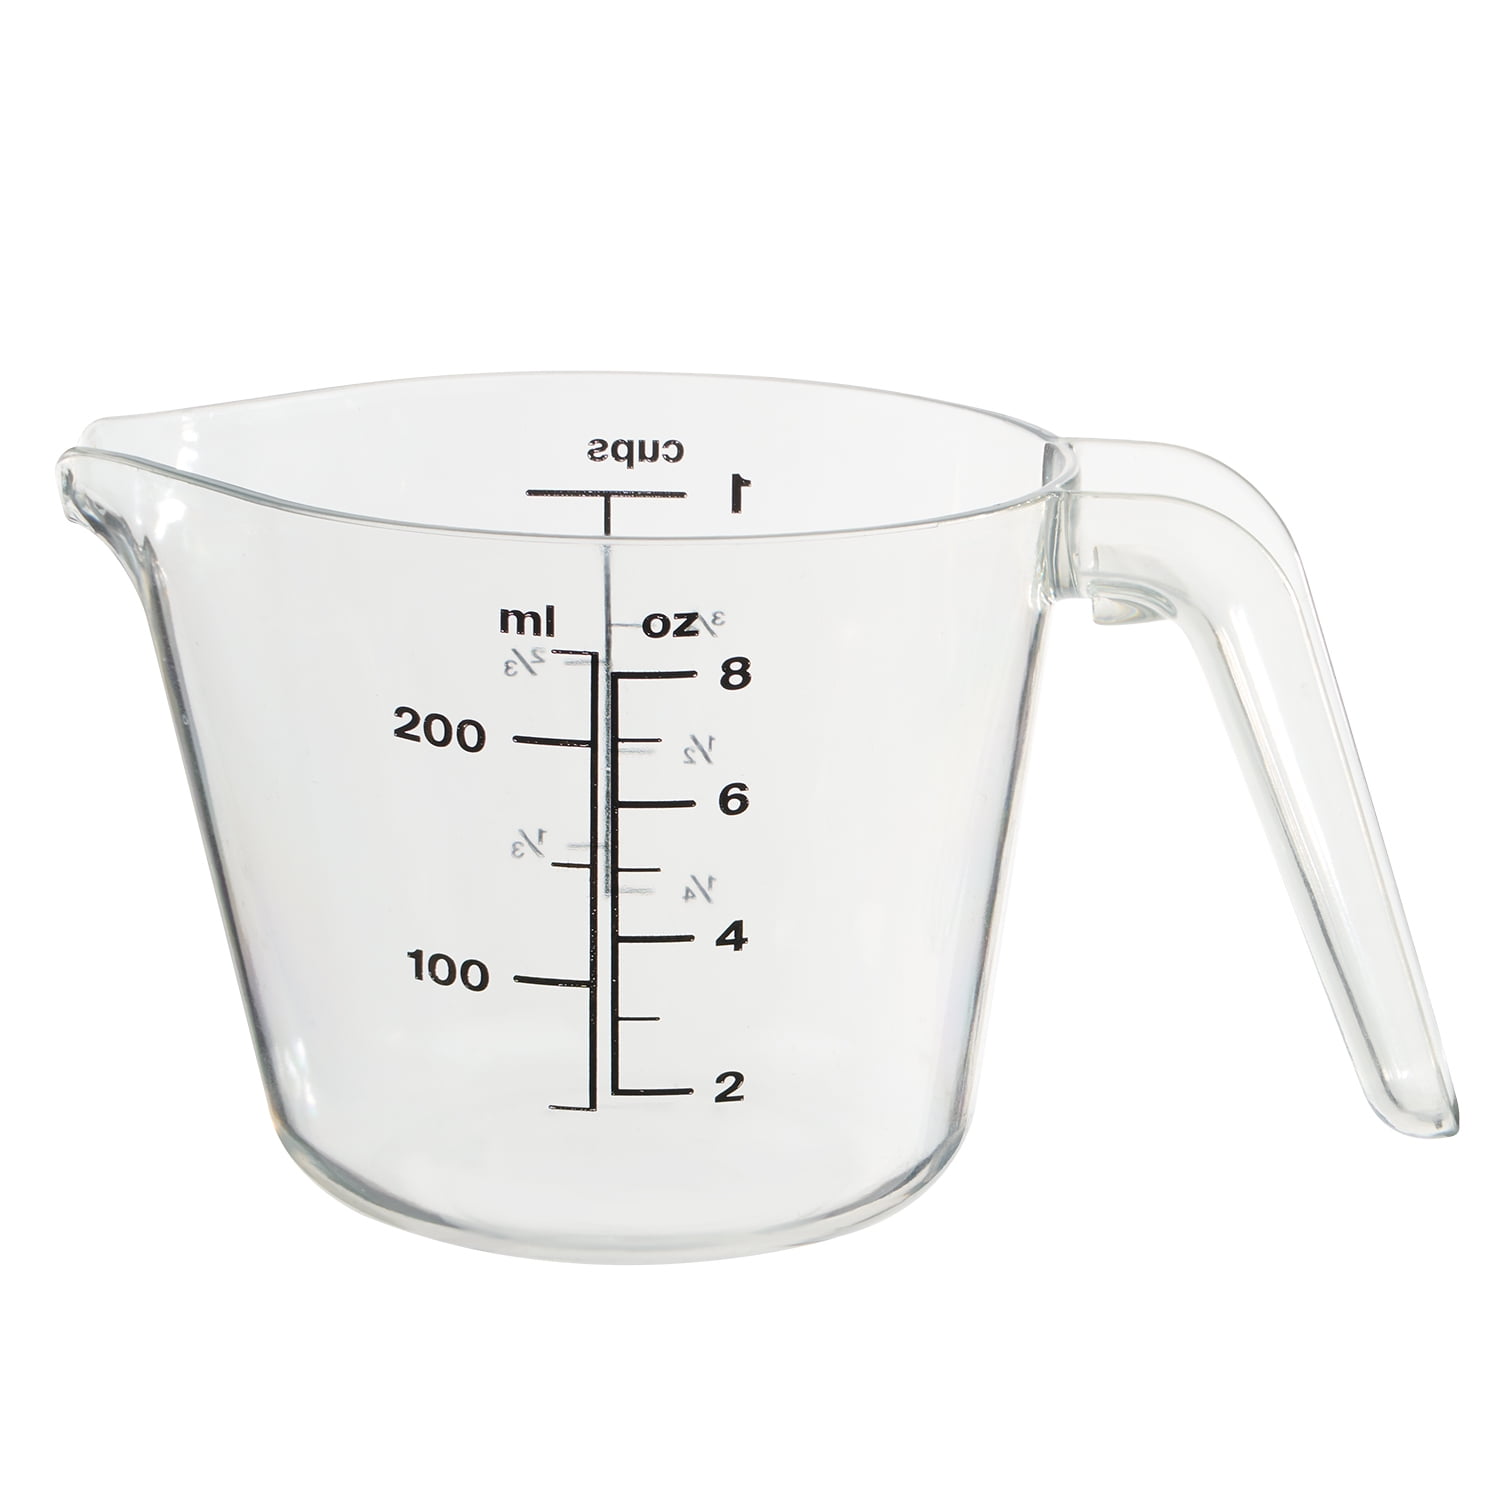 RW Base 1 qt Clear Plastic Measuring Cup - 10 count box